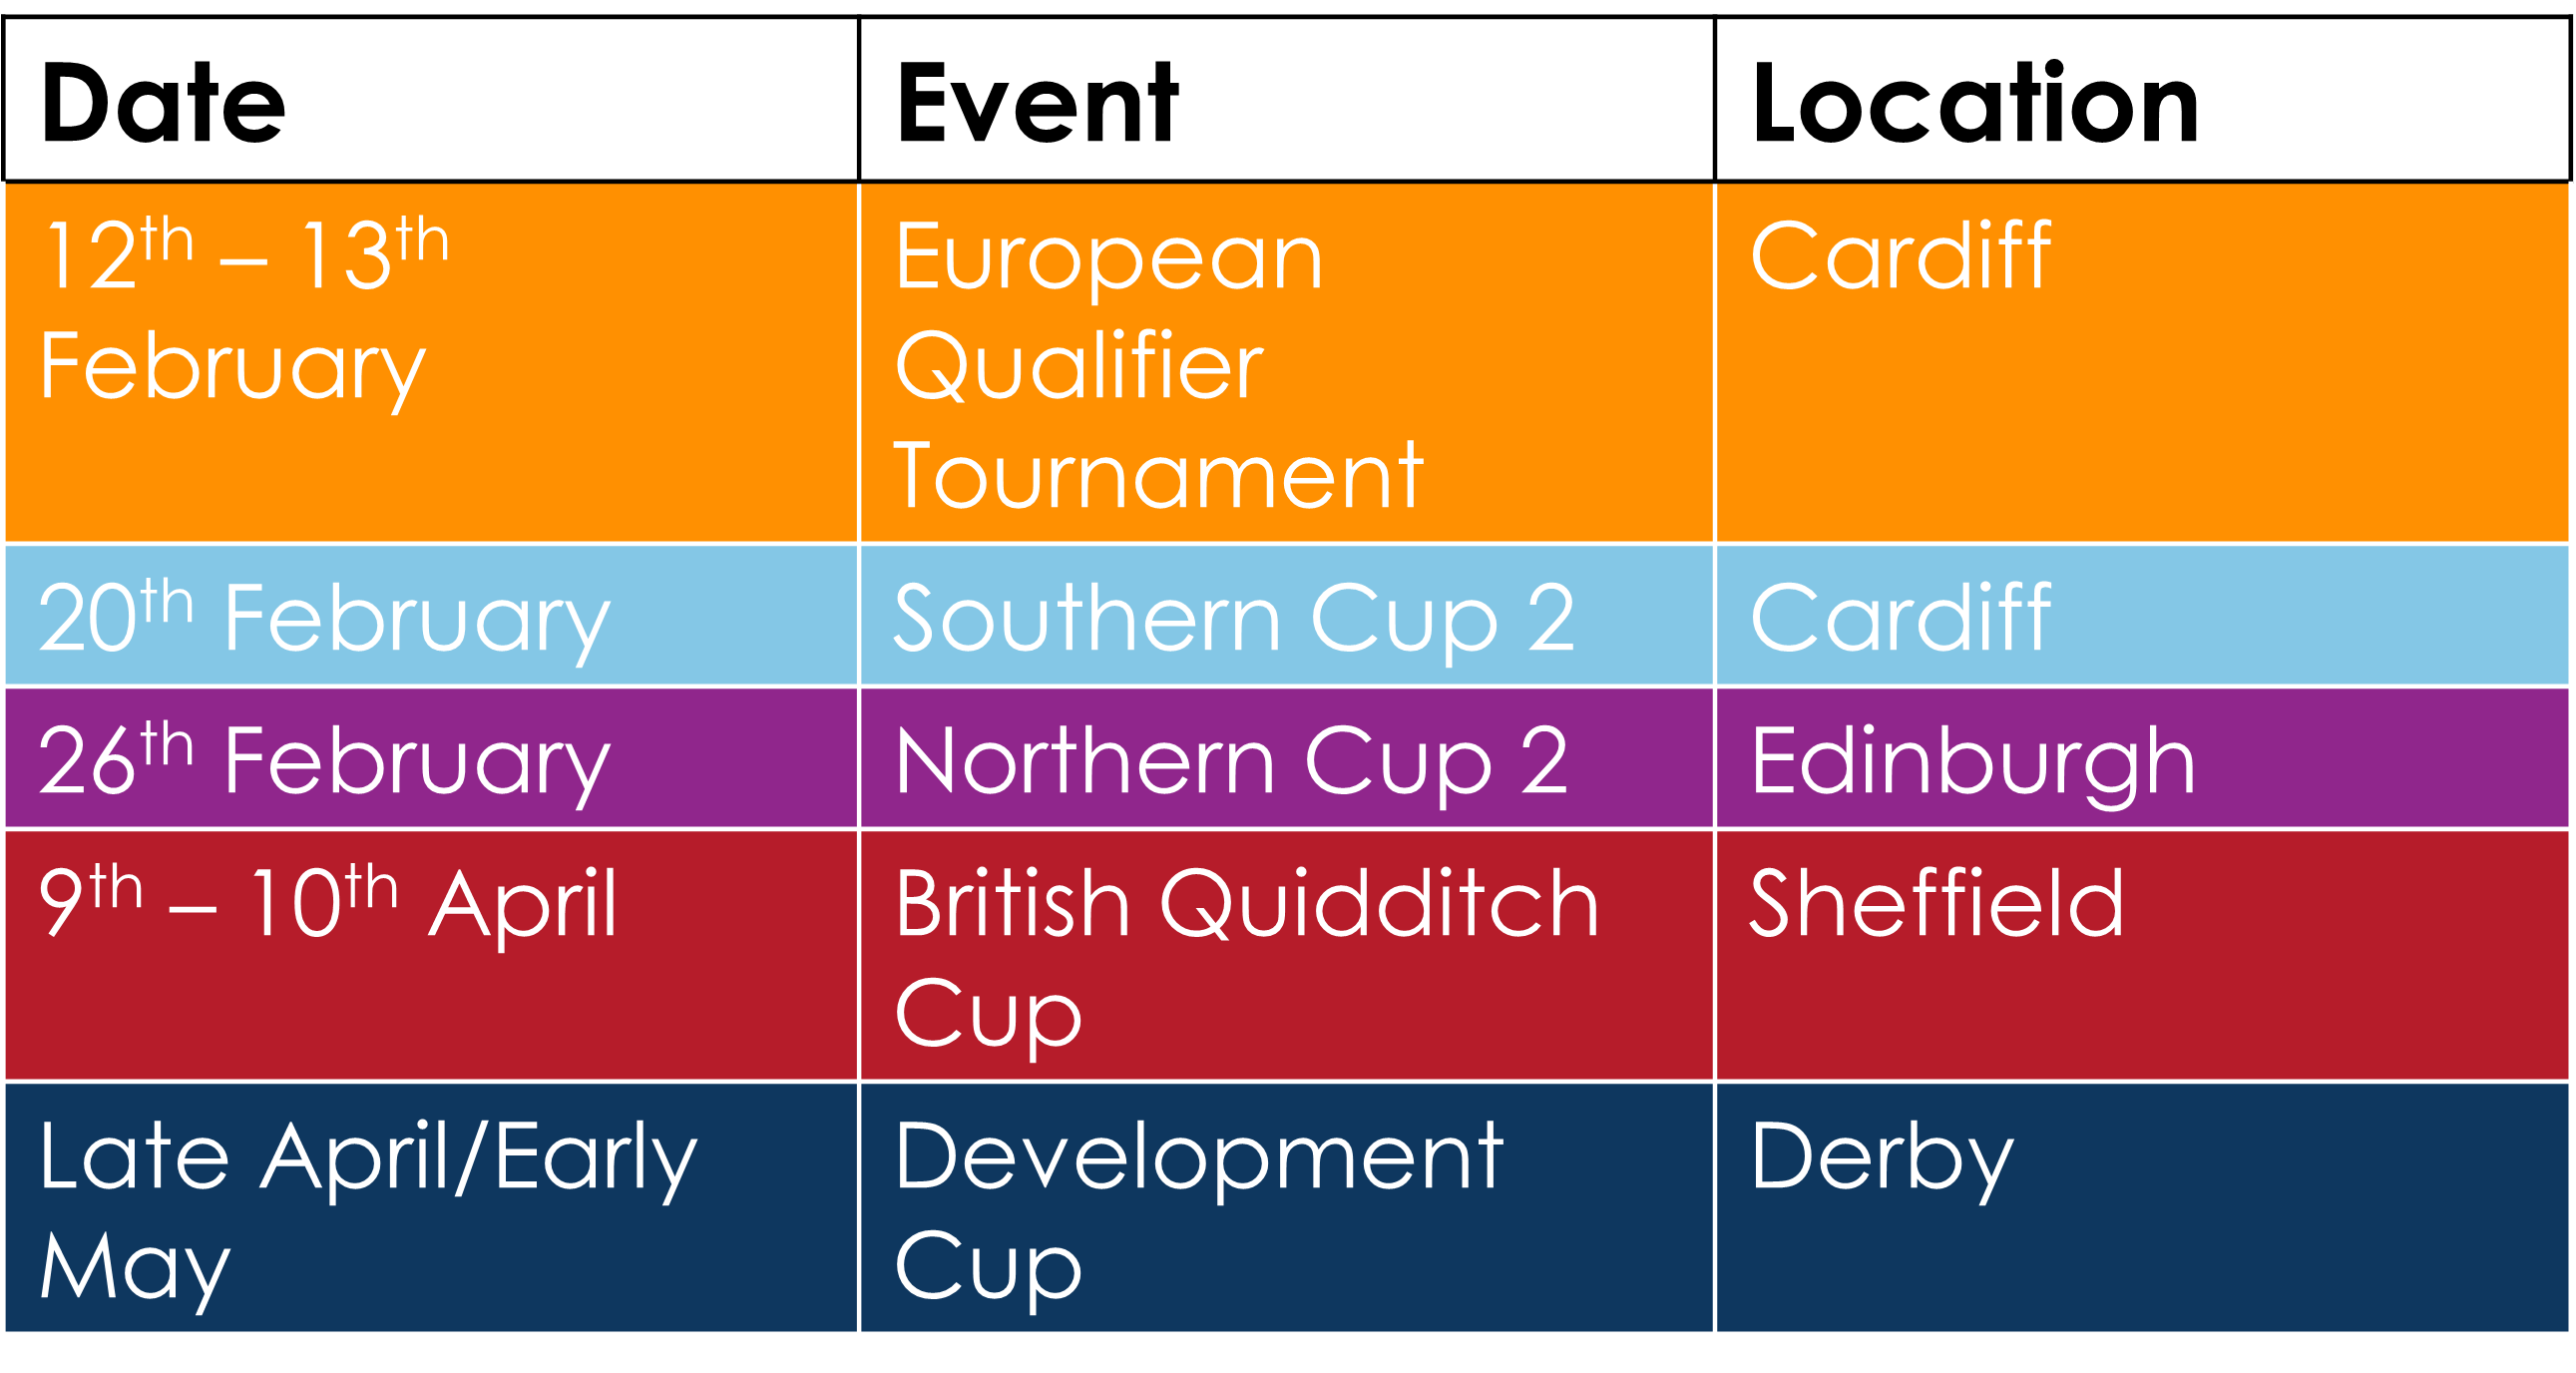 Table containing the details for the upcoming season, including date, event and location, as detailed in the section below.